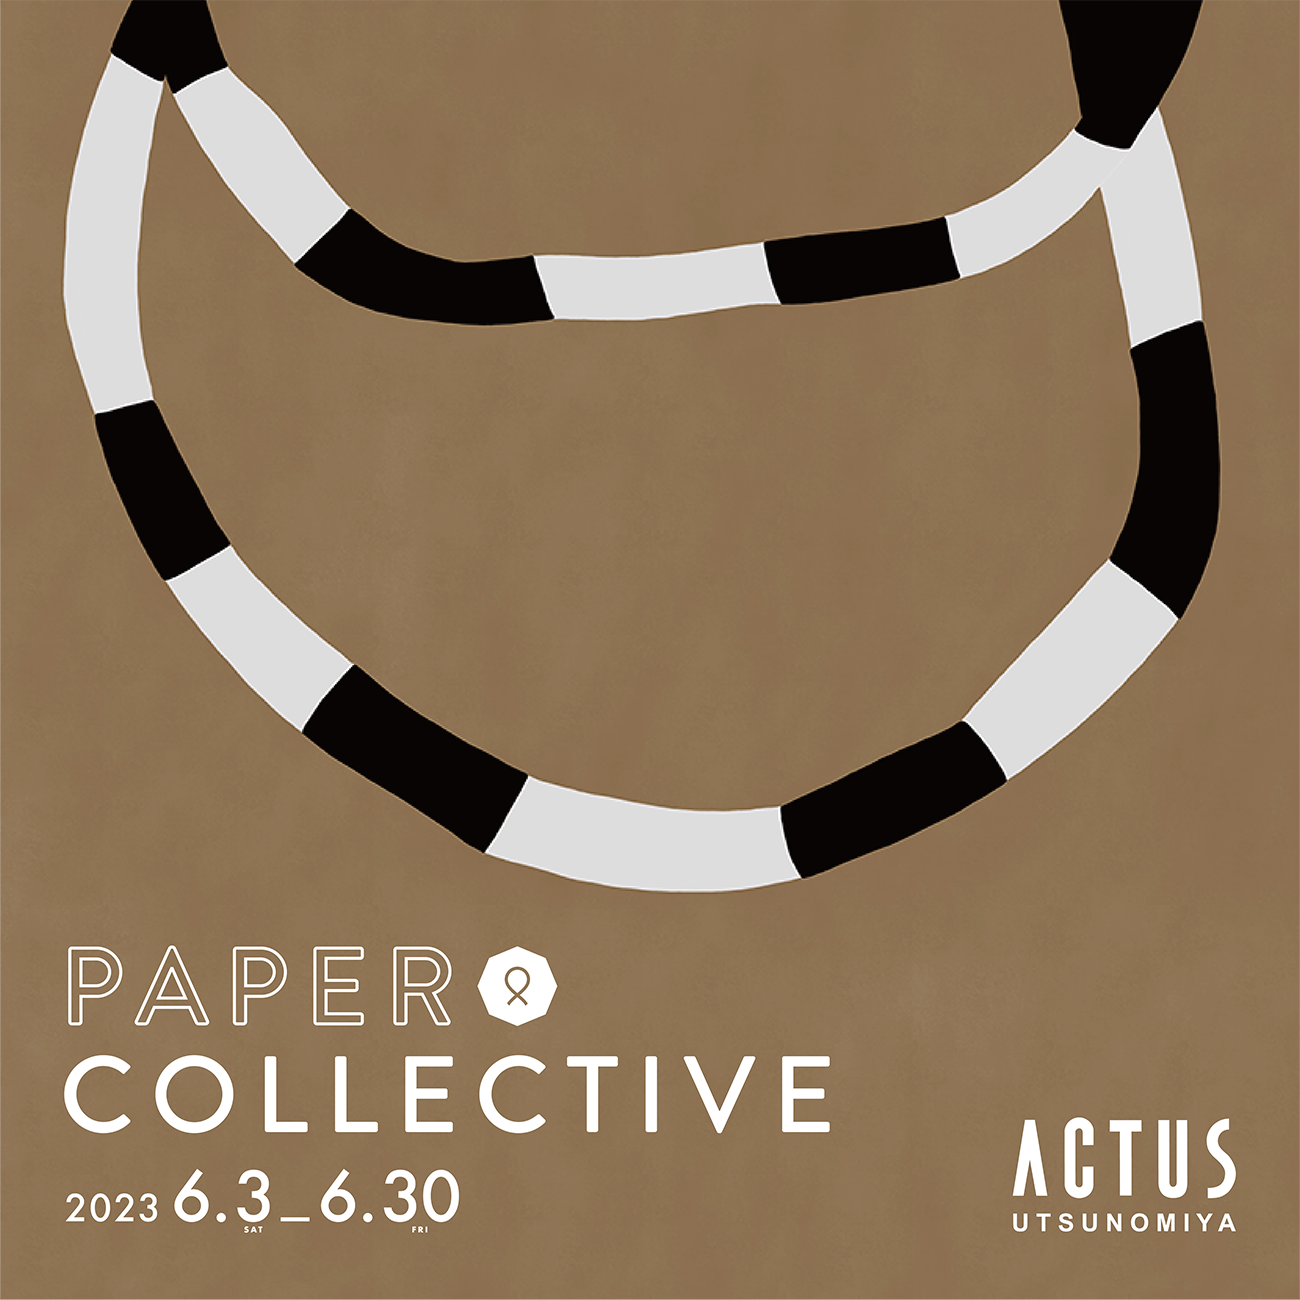 PAPER COLLECTIVE（ペーパーコレクティブ）